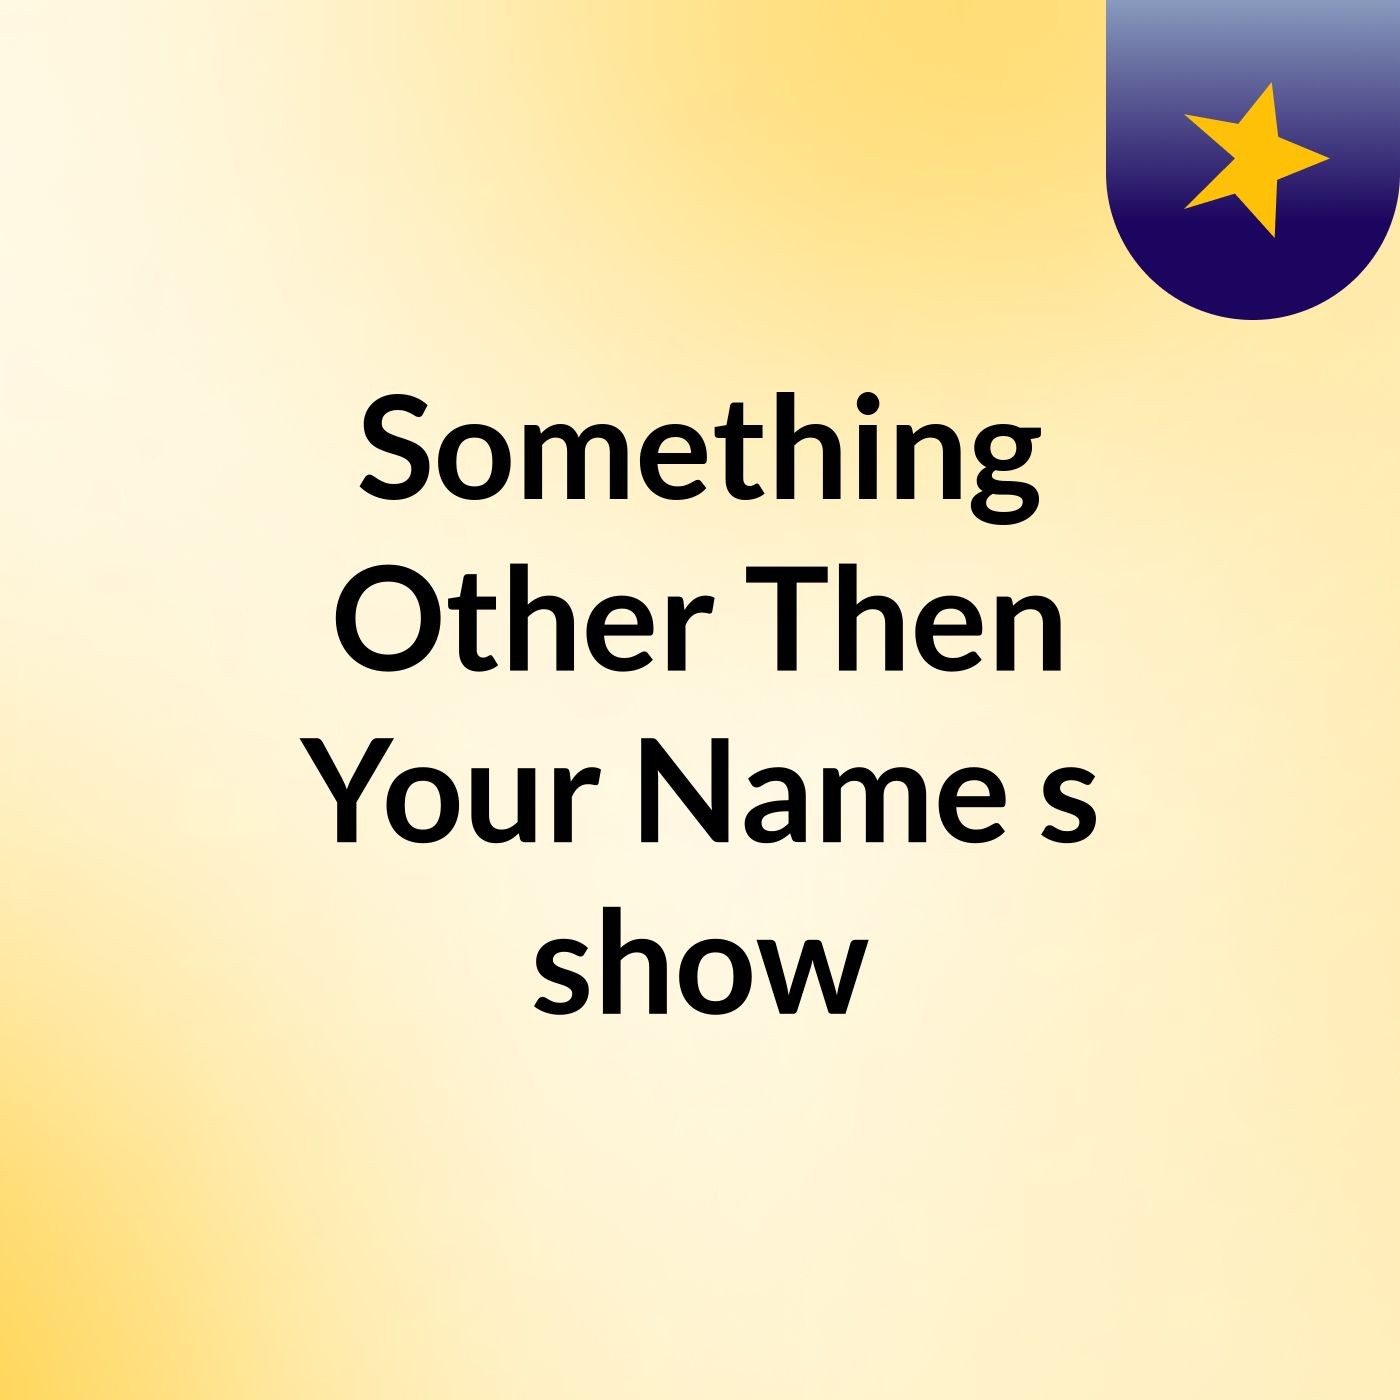 Episode 5 - Something Other Then Your Name's show